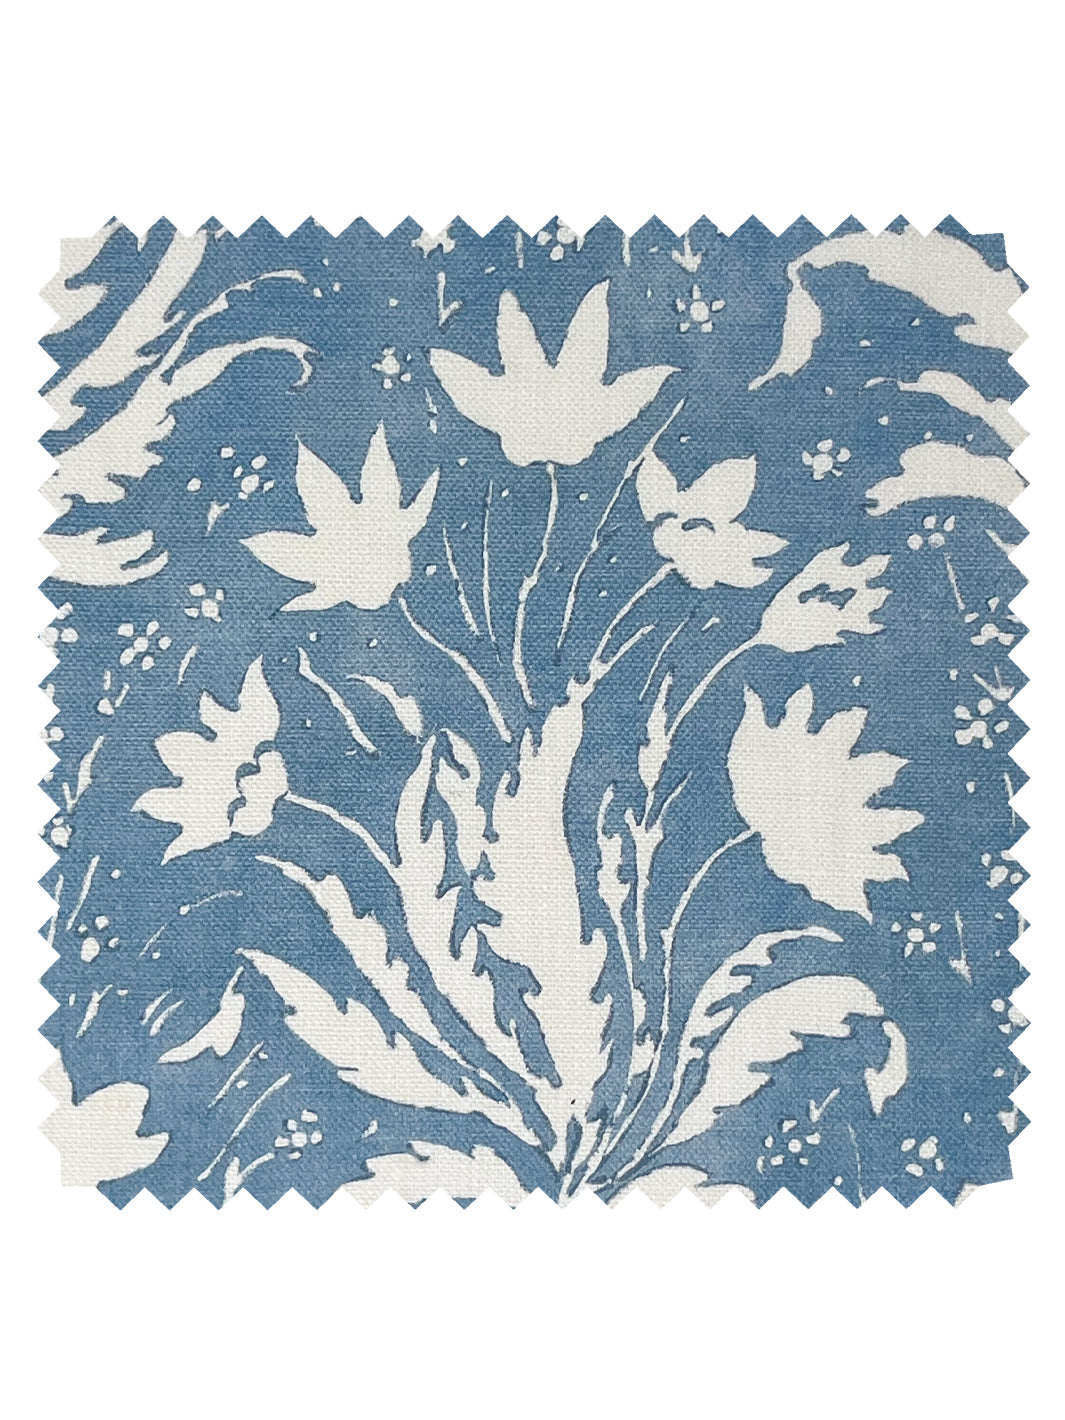 'Hillhouse Floral One Color' Linen Fabric by Nathan Turner - Blue